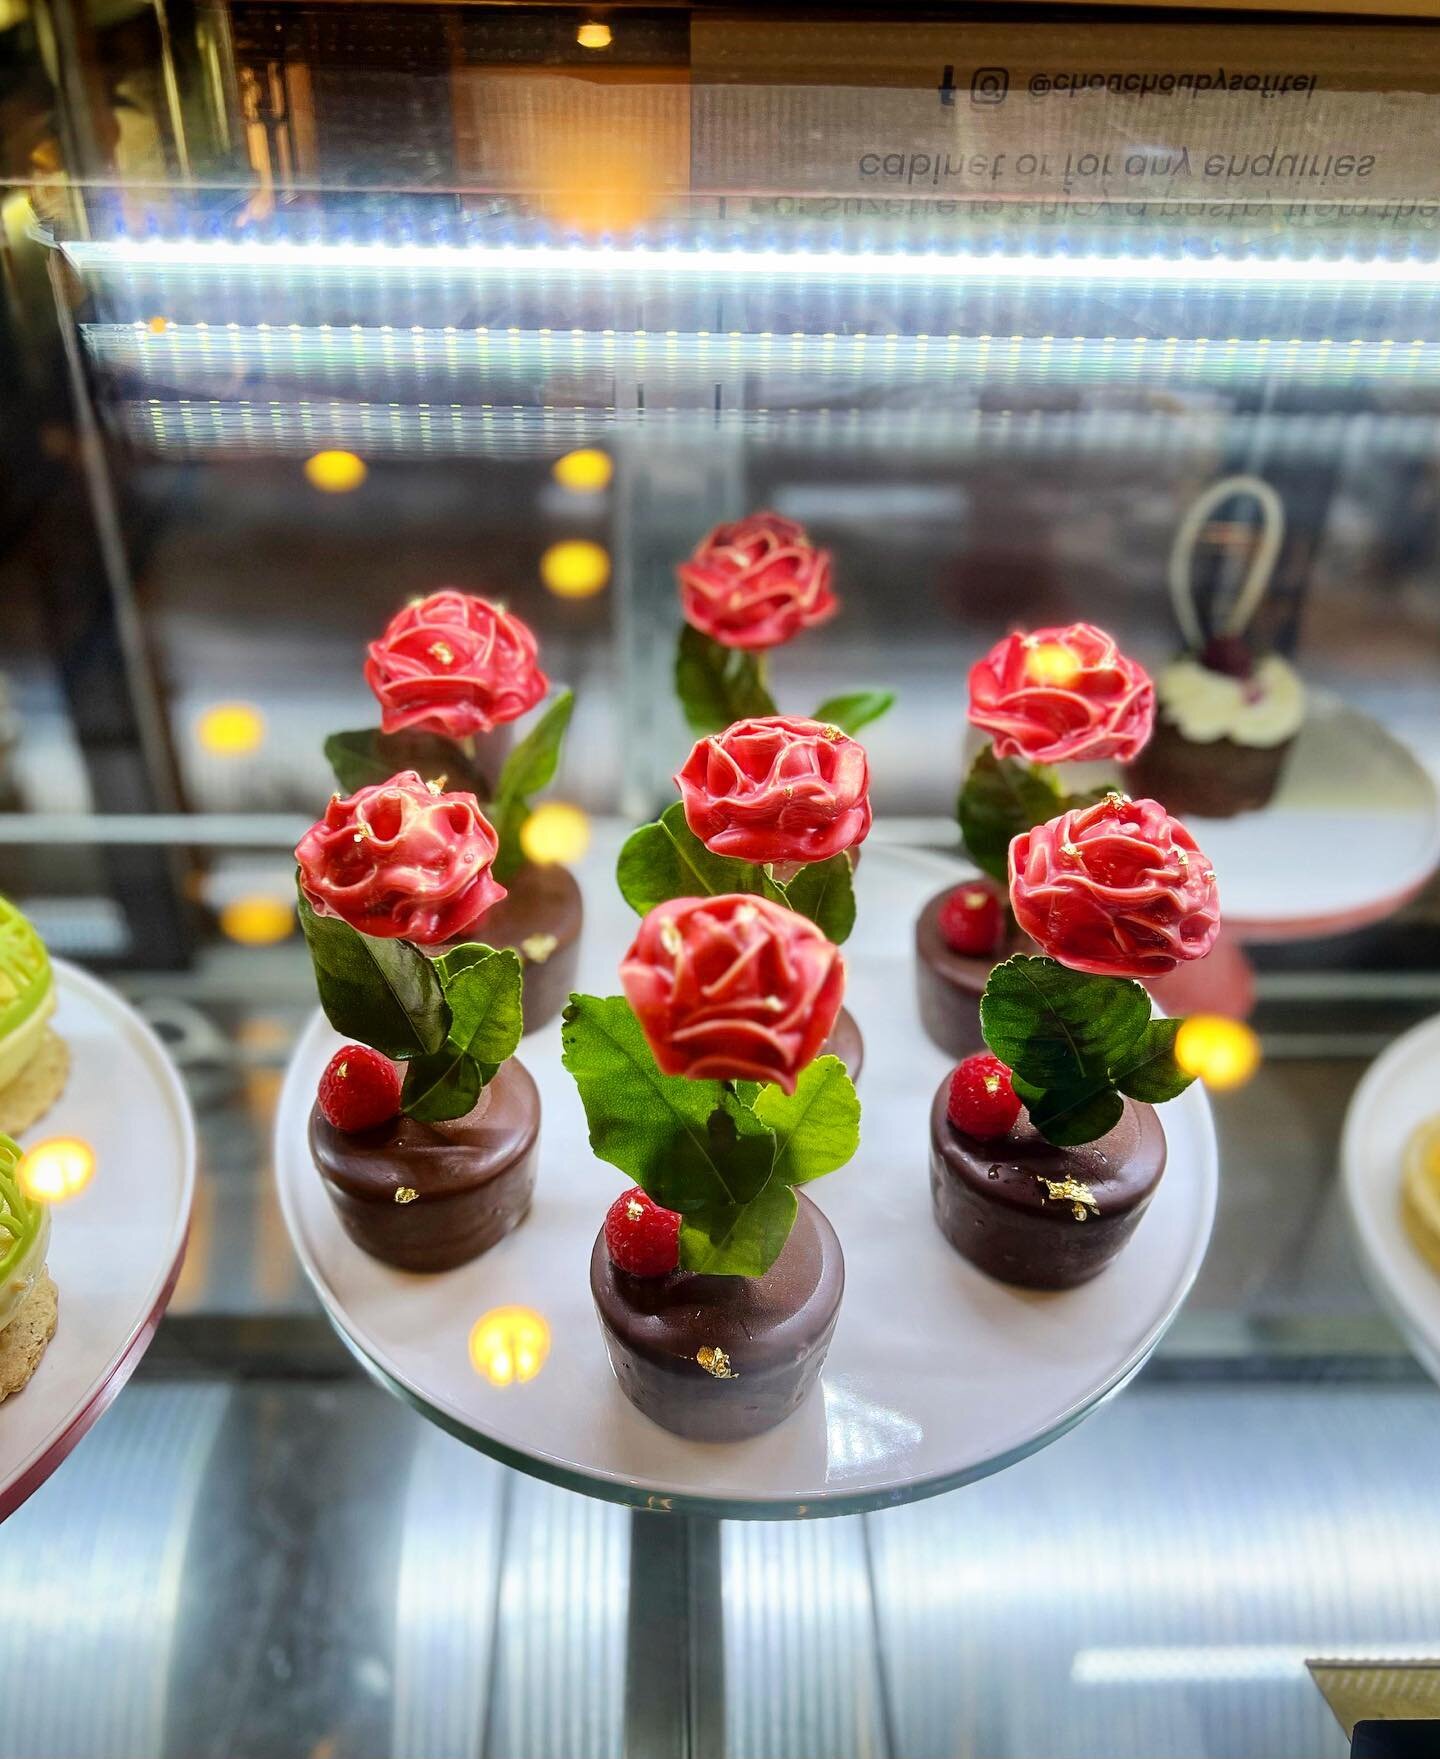 Not your typical bouquet of flowers 💐 Have you tried our newest signature item, our handcrafted, fully-edible Fleur de Rose? Drop by this week! #ChouchouBySofitel